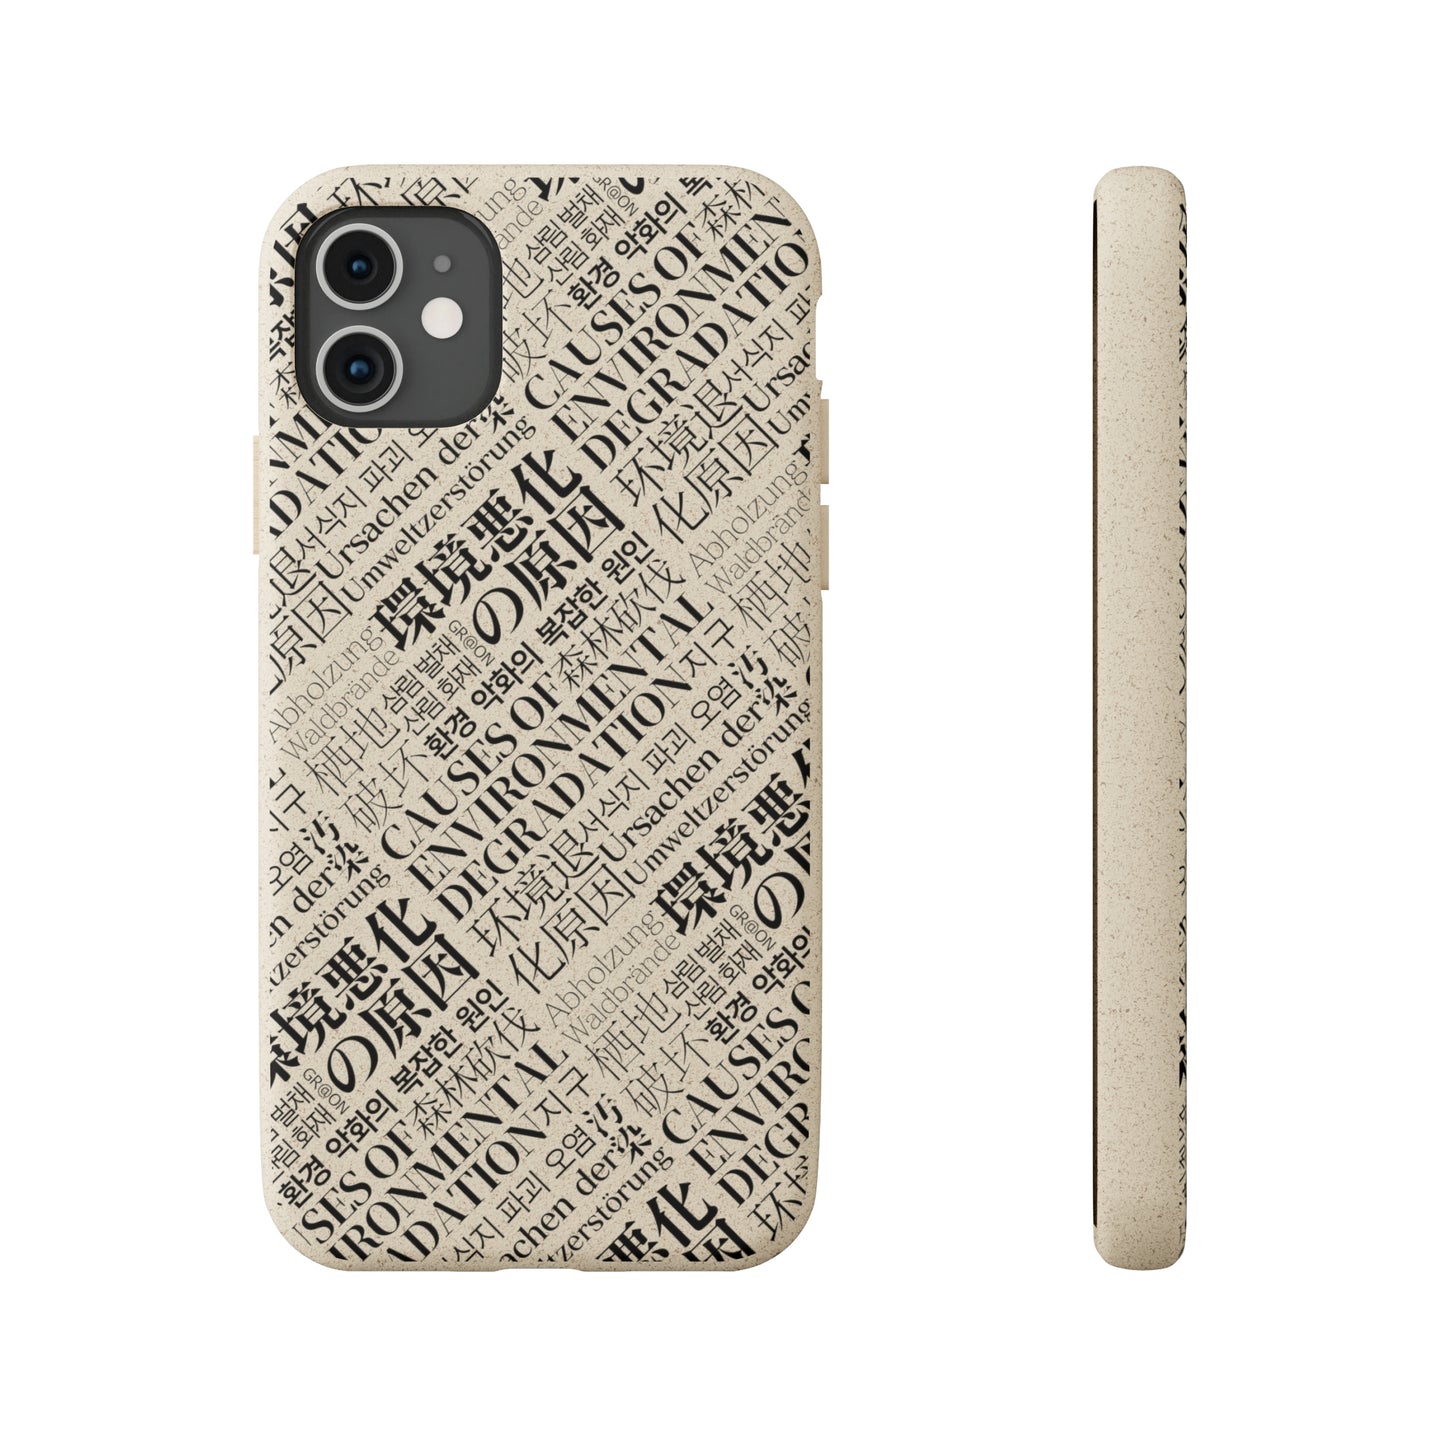 Eco-Friendly - Biodegradable Cases suitable for iphone - Causes of Environmental Degradation